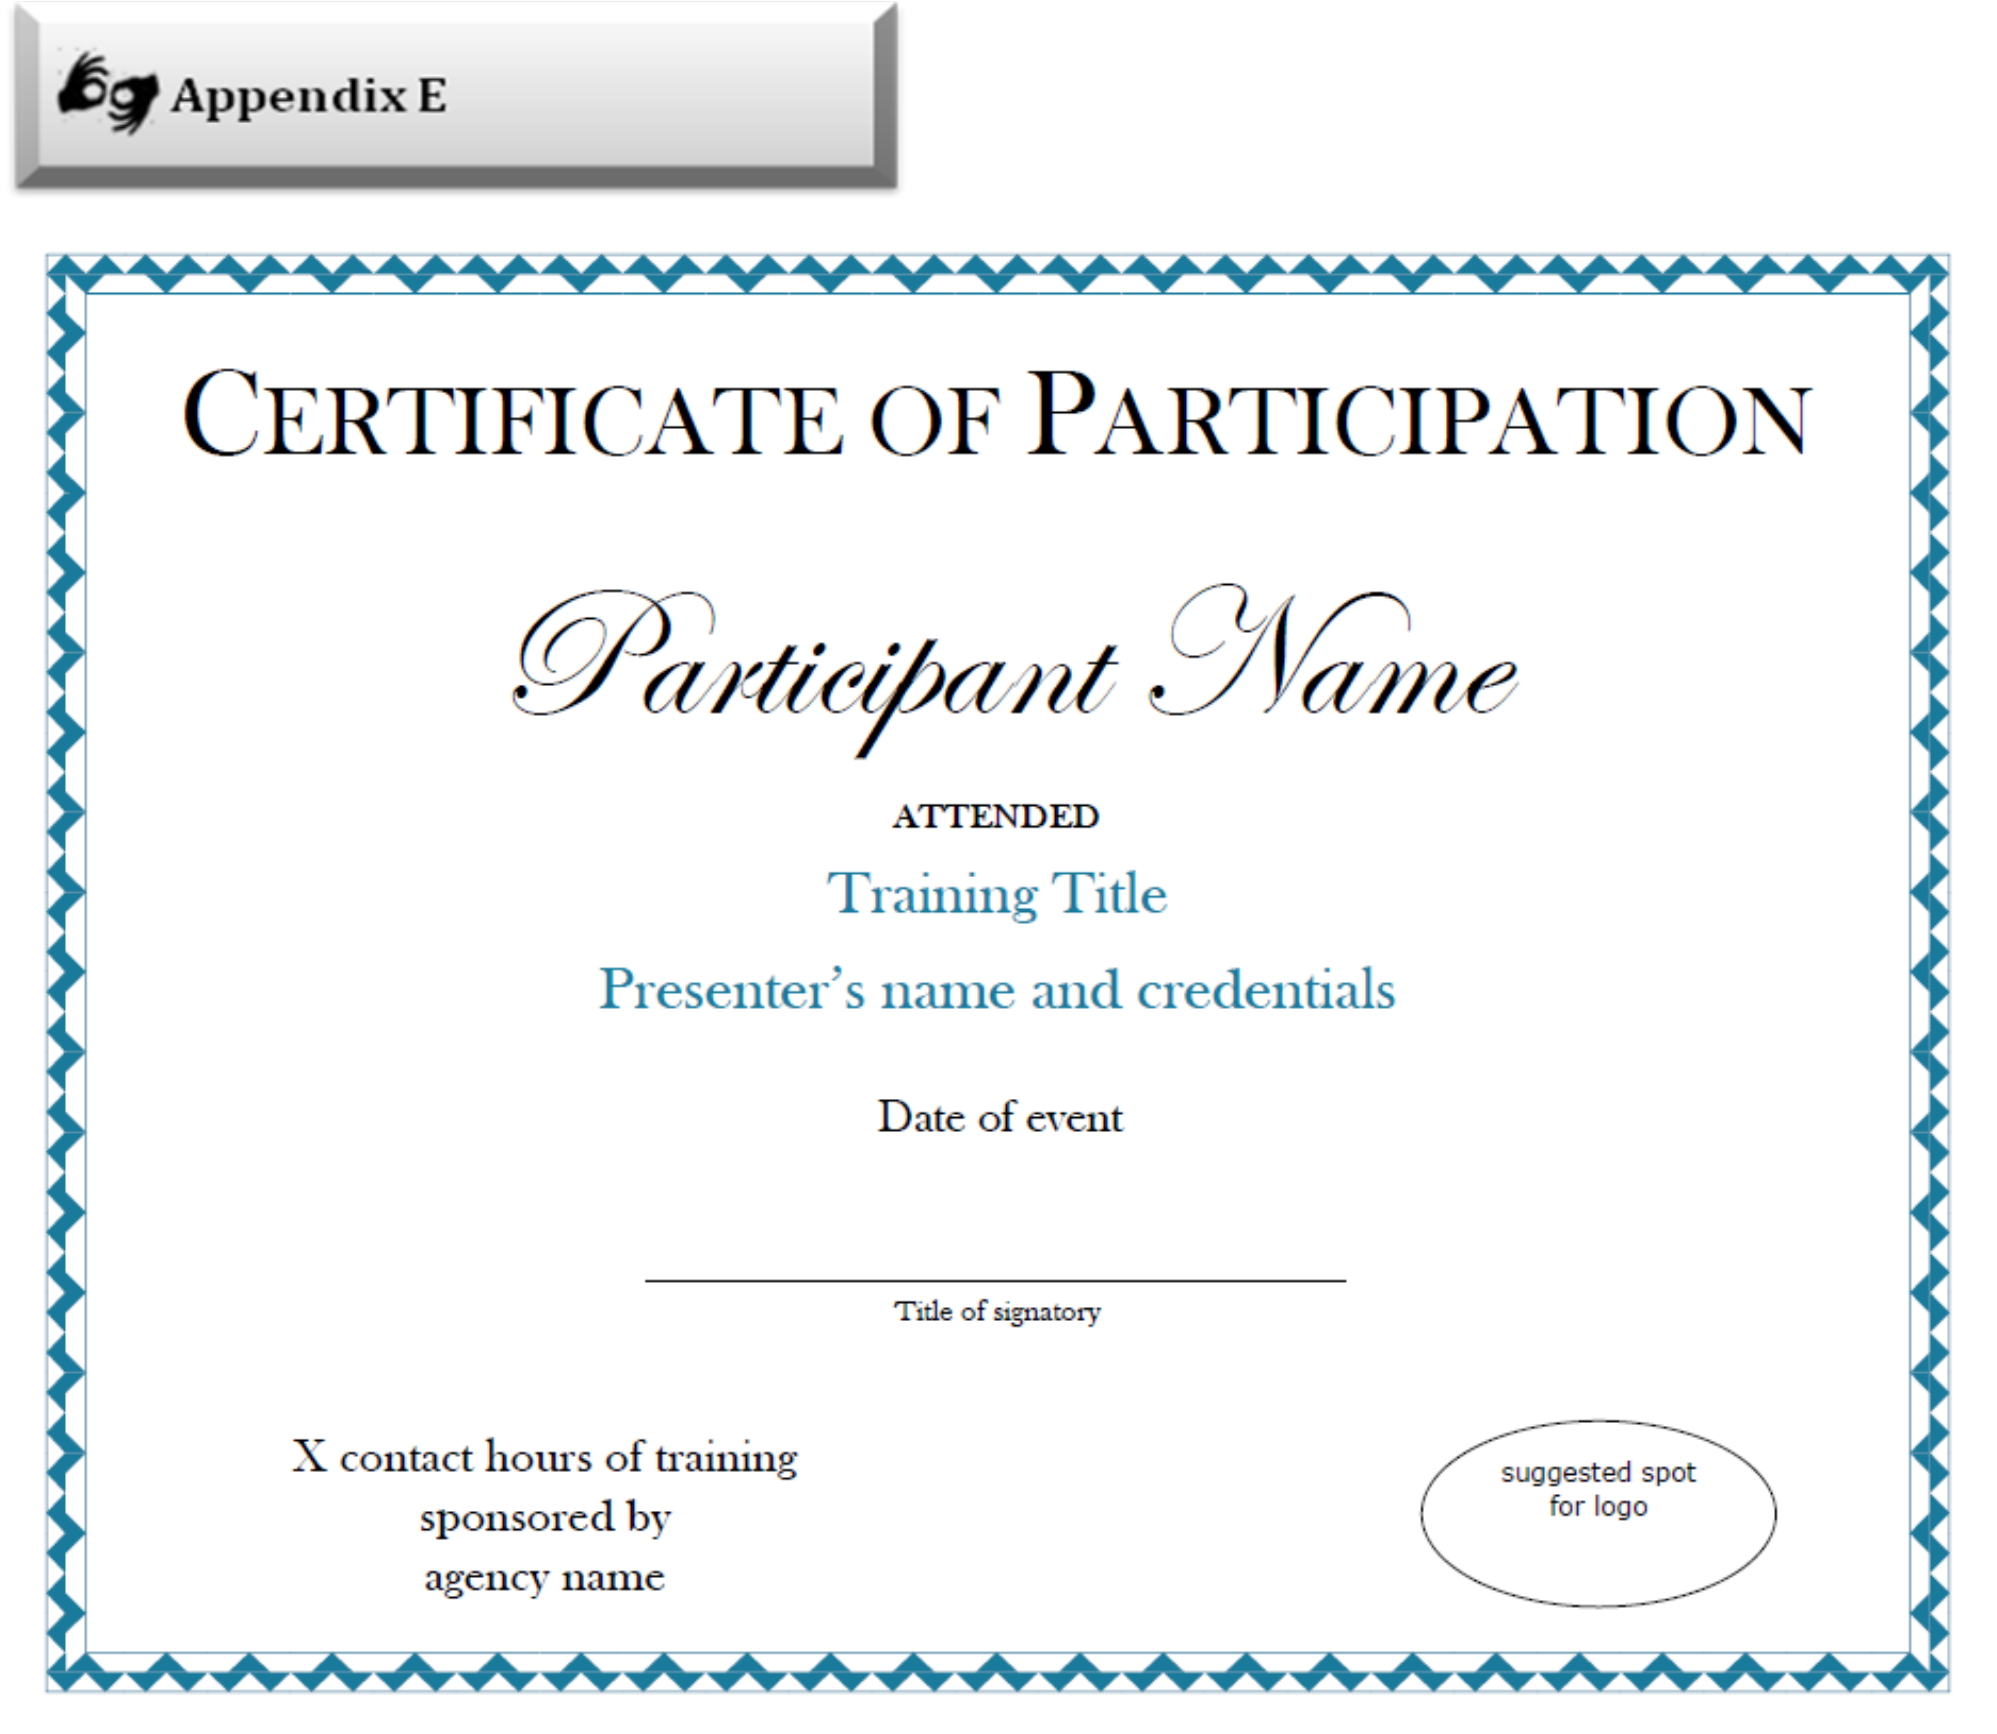 Certificate Of Participation Sample Free Download With Regard To Certification Of Participation Free Template